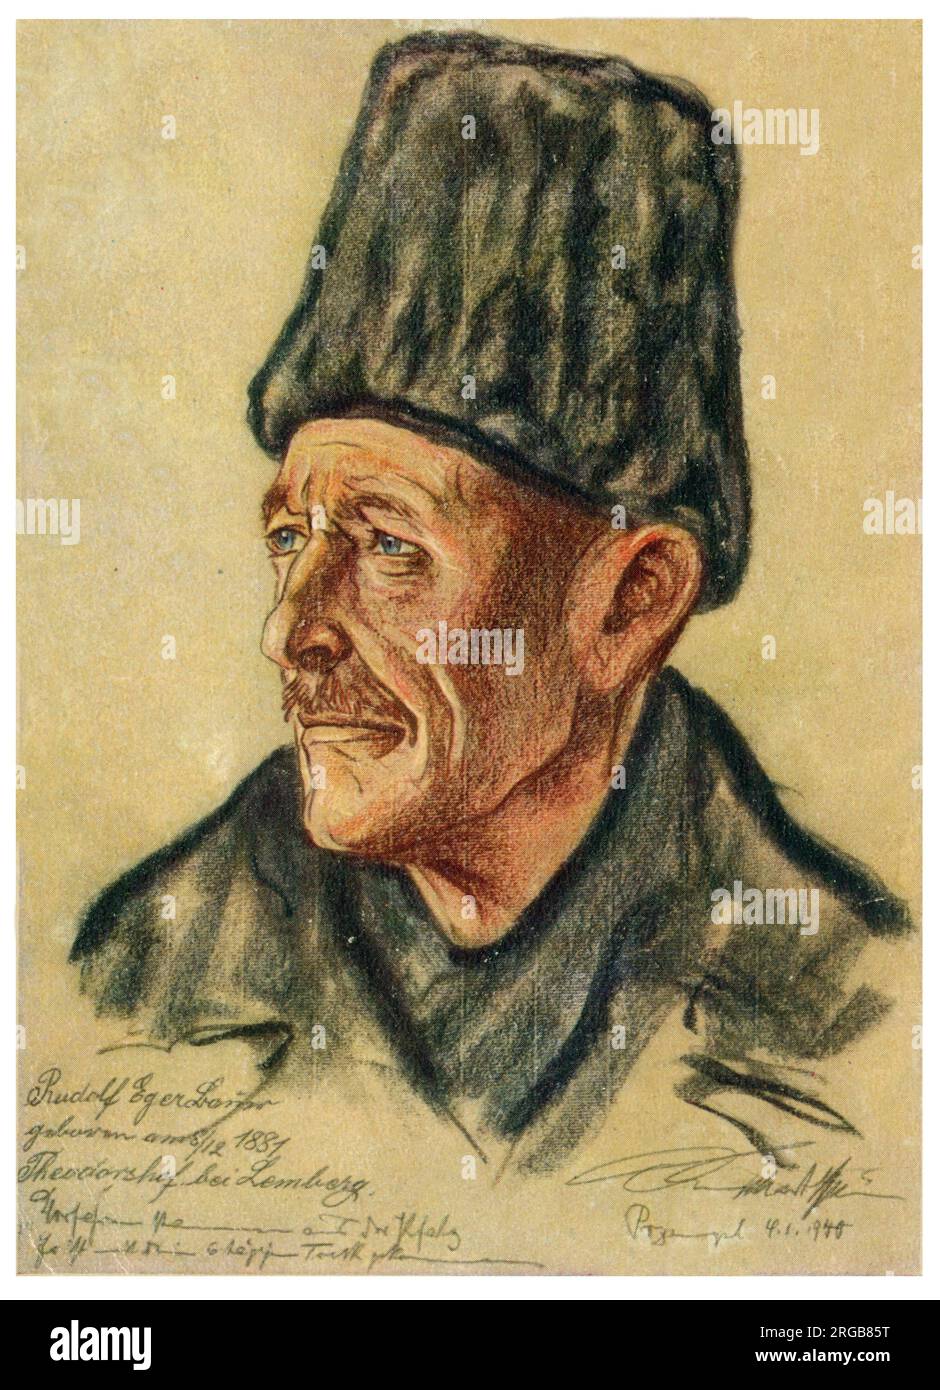 Painting by Otto Engelhardt-Kyffhauser from his 'Great Trek' series - Farmer Rudolf Eger. Engelhardt-Kyffhauser was a member of the NSDAP and SS and drew numerous images of war and portrayed several national socialist greats. In January 1940, Engelhardt-Kyffhauser accompanied a trek of ethnic Germans at Himmler's request . These folk were from Galicia and Volhynia (which belonged to the Soviet-annexed Eastern Poland), and were relocated to Warthegau. 120,000 Poles had previously been deported in order to create settlement space for them. Engelhardt-Kyffhäuser documented the journey through num Stock Photo